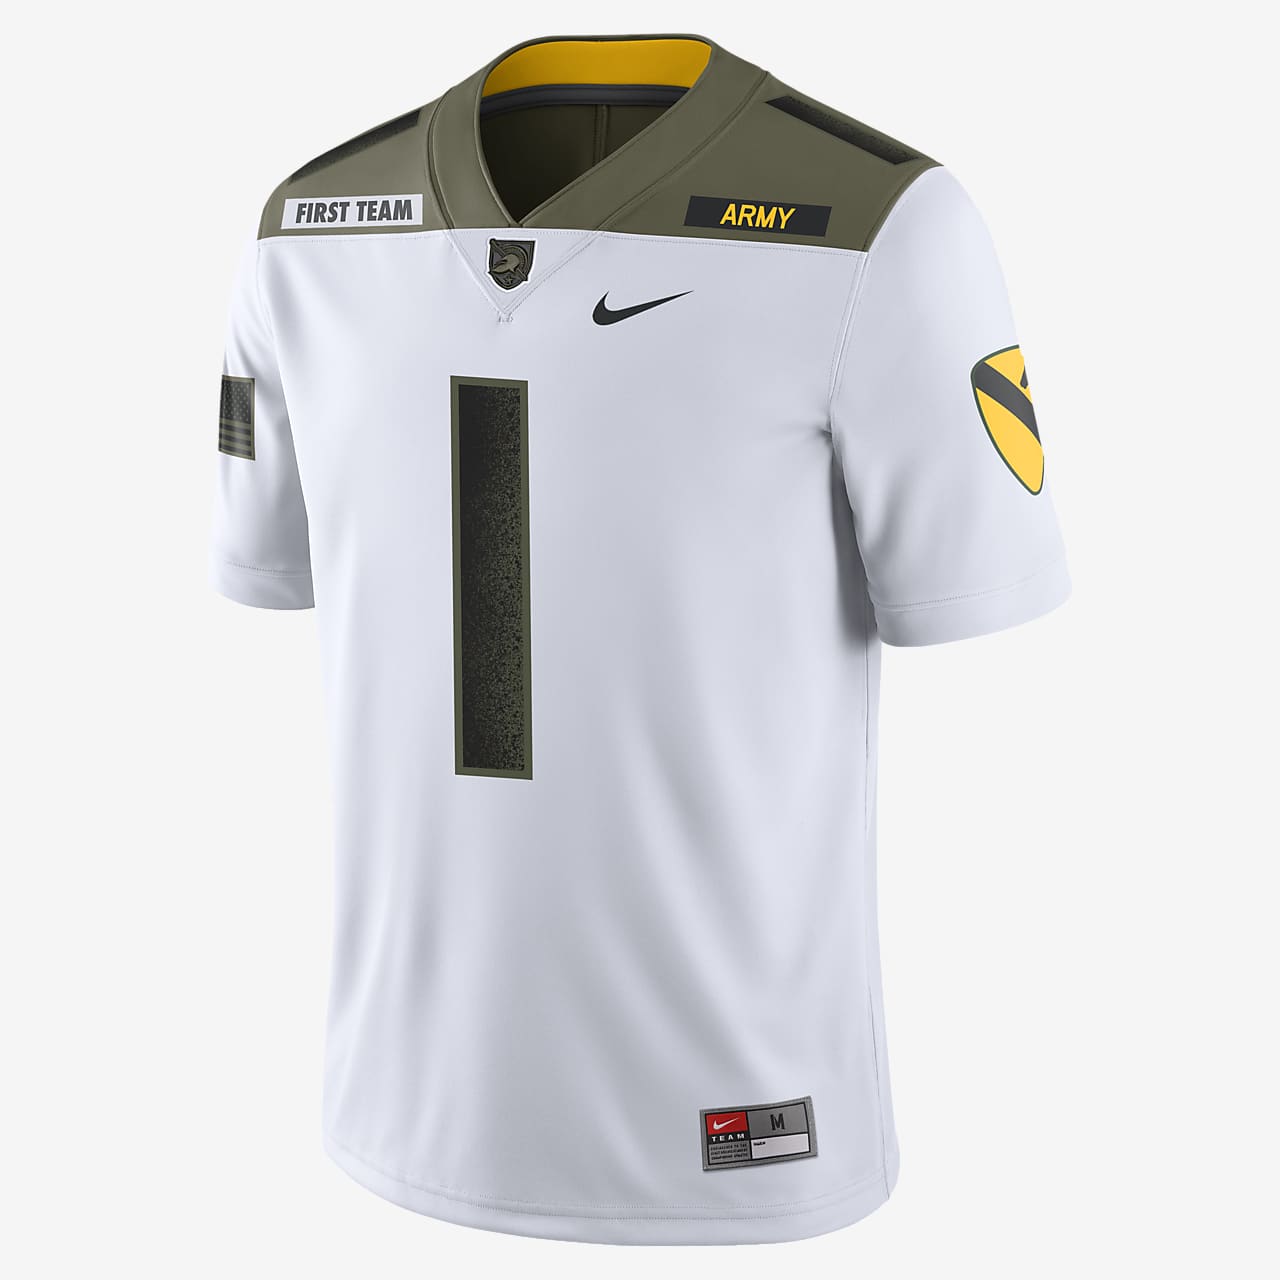 army jersey